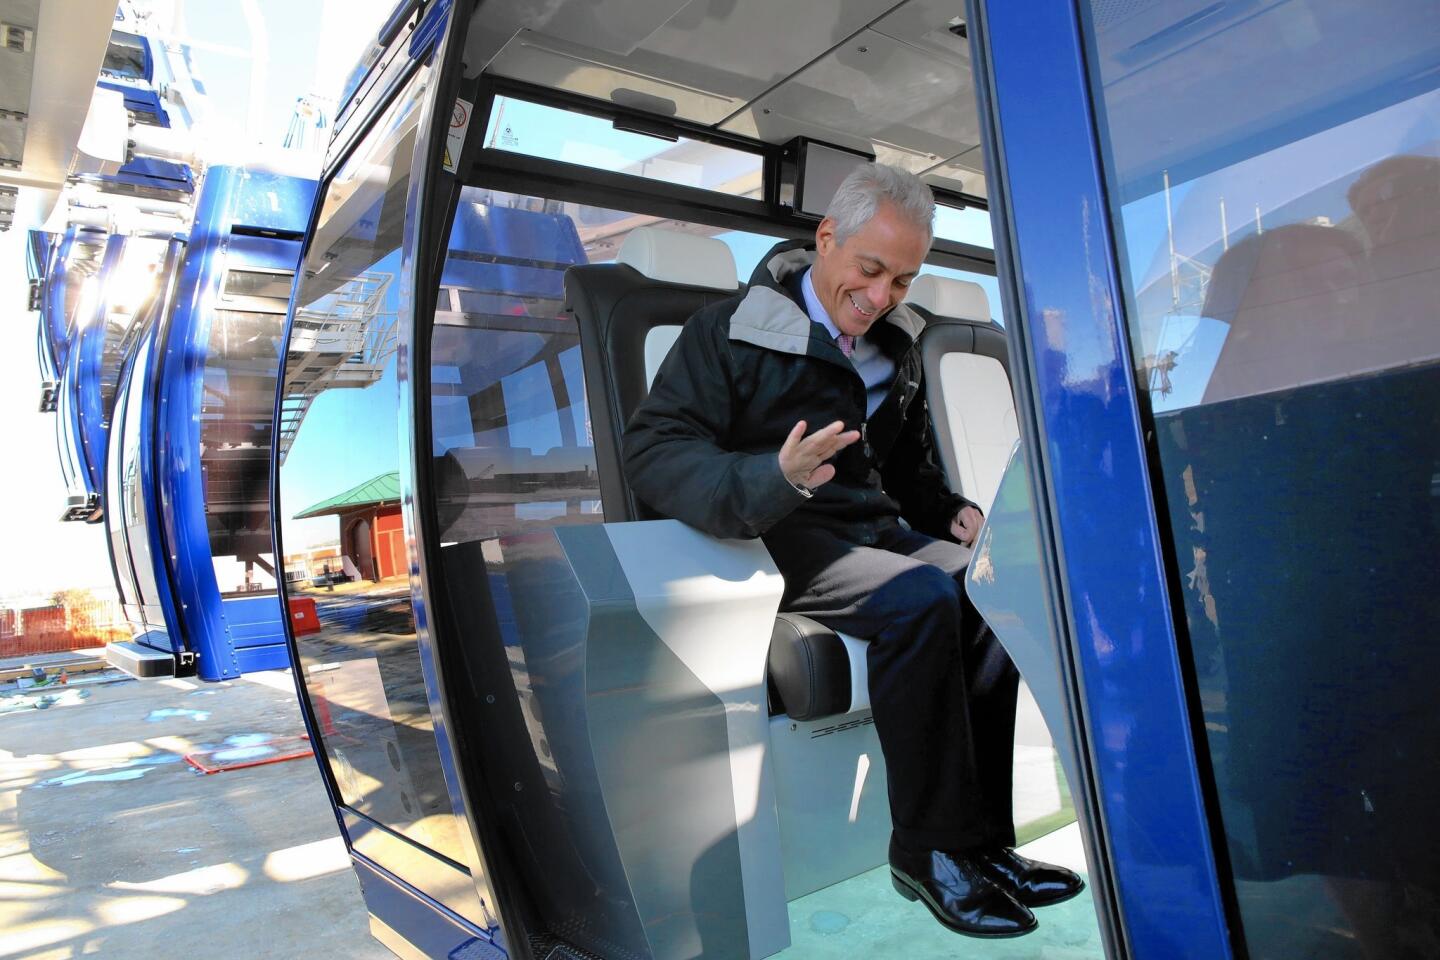 Chicago Mayor Rahm Emanuel tries out a new gondola on the Ferris wheel, slated to debut May 27 on Navy Pier.